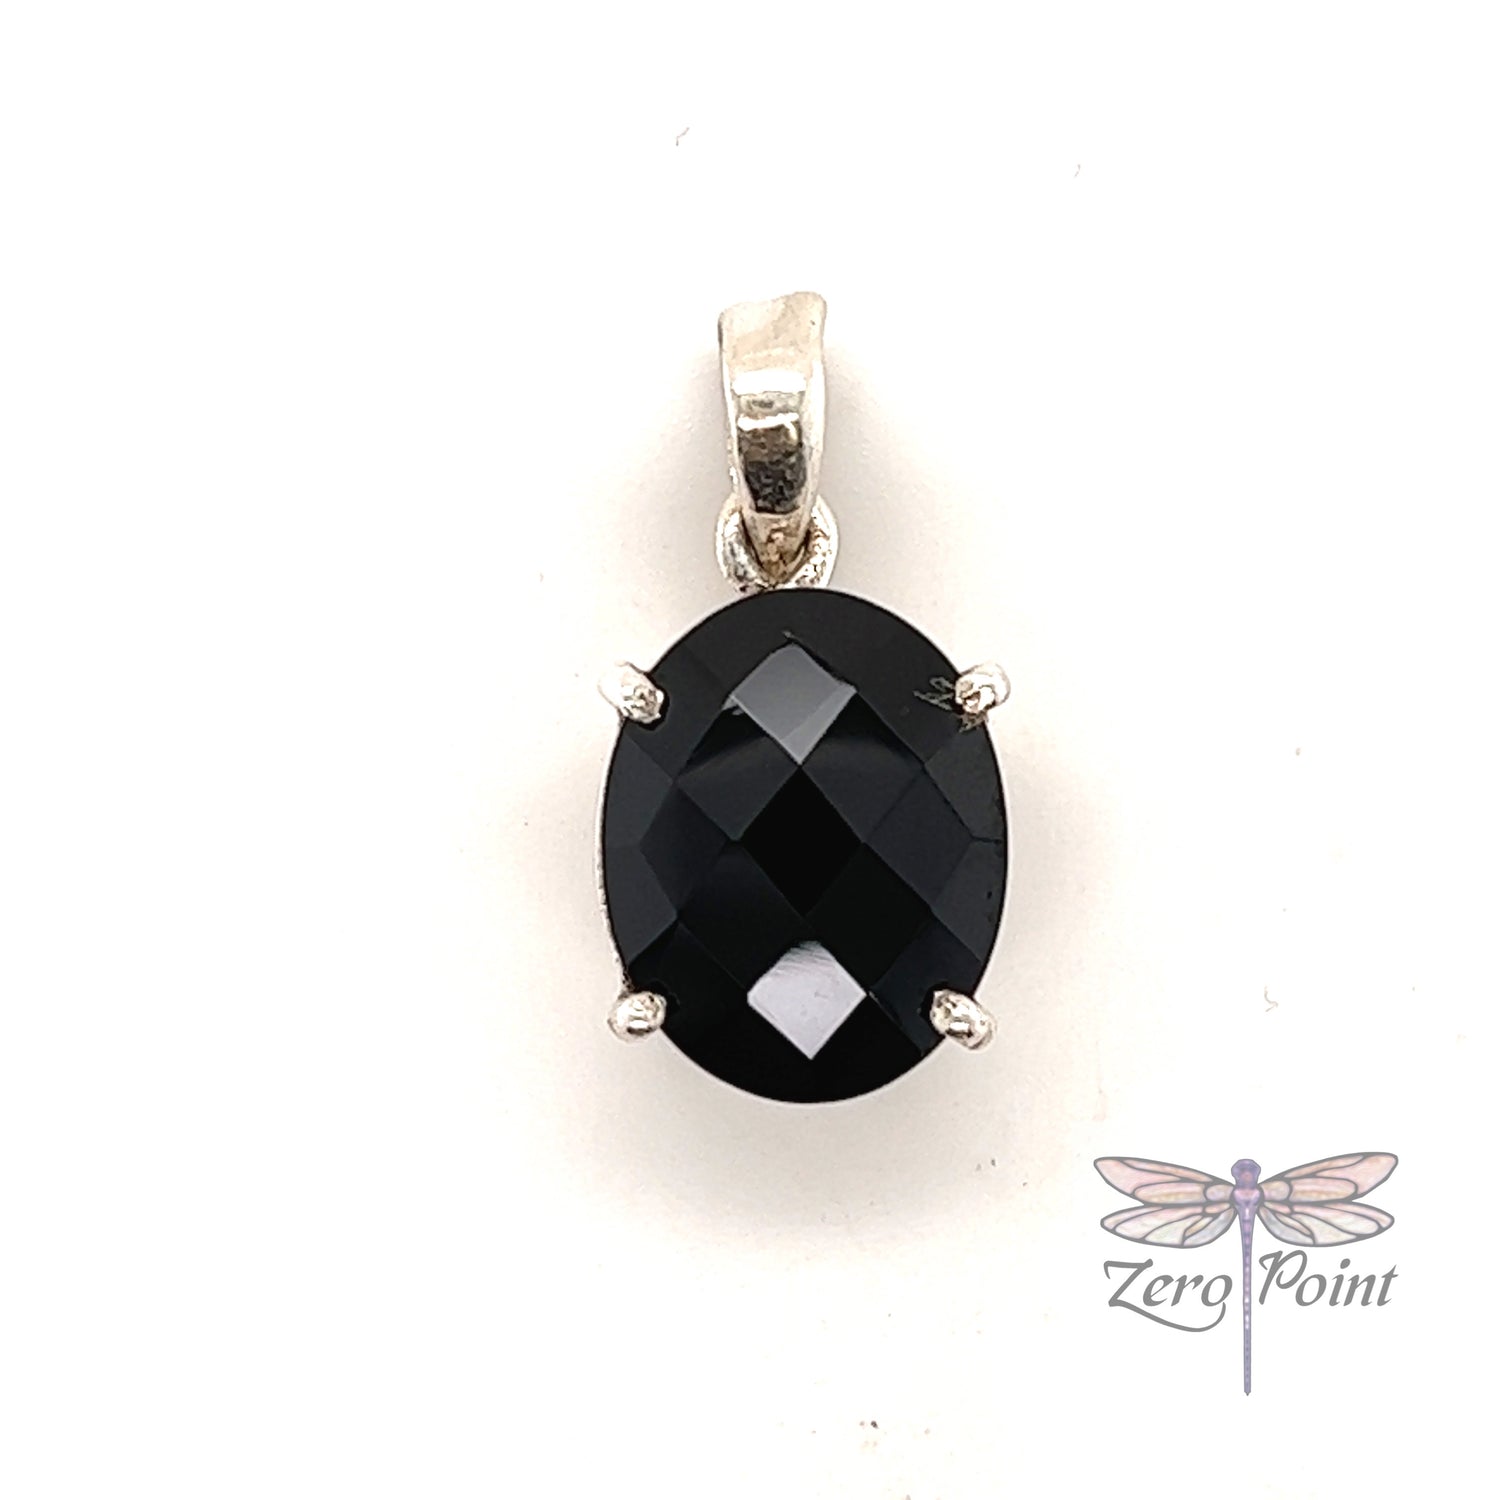 Faceted Spinel Pendant - Zero Point Crystals